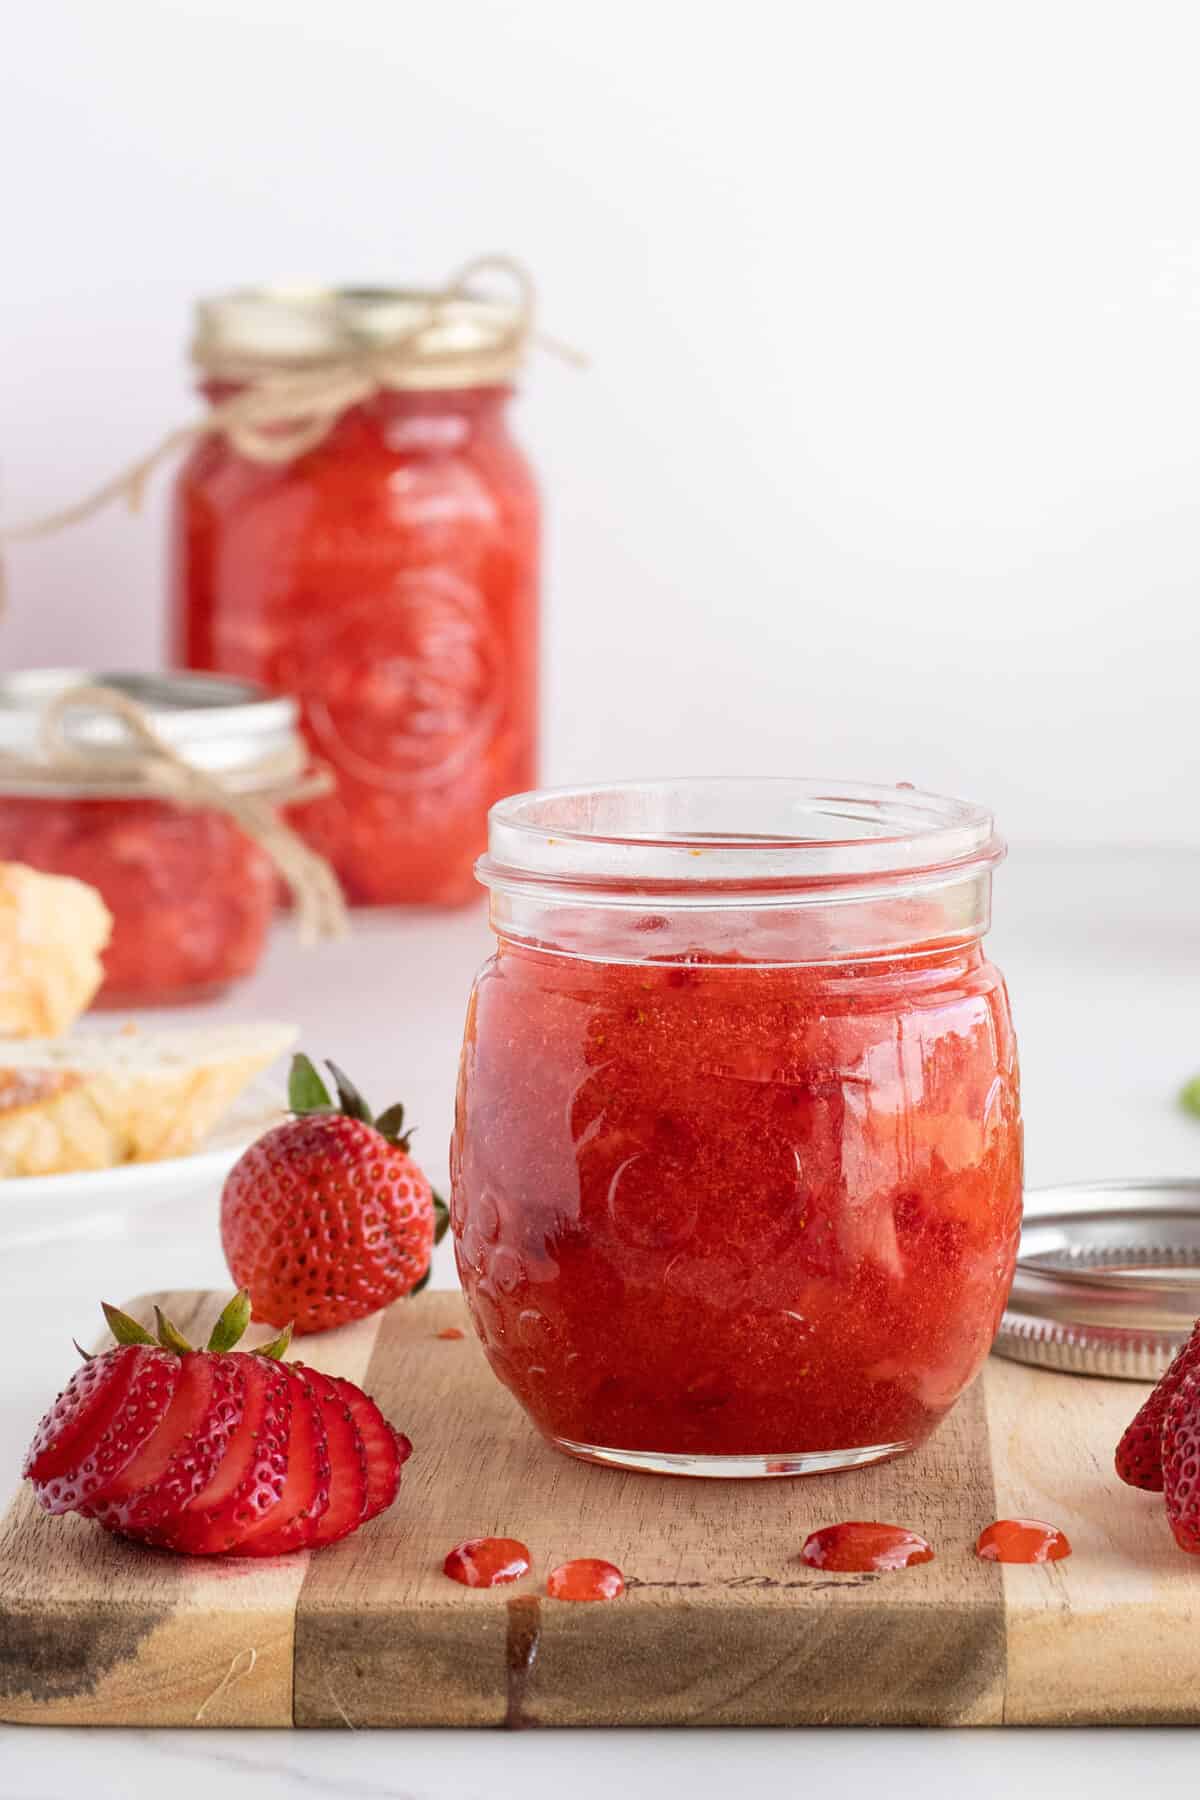 How to Make Your Own Freezer Jam - A Few Shortcuts